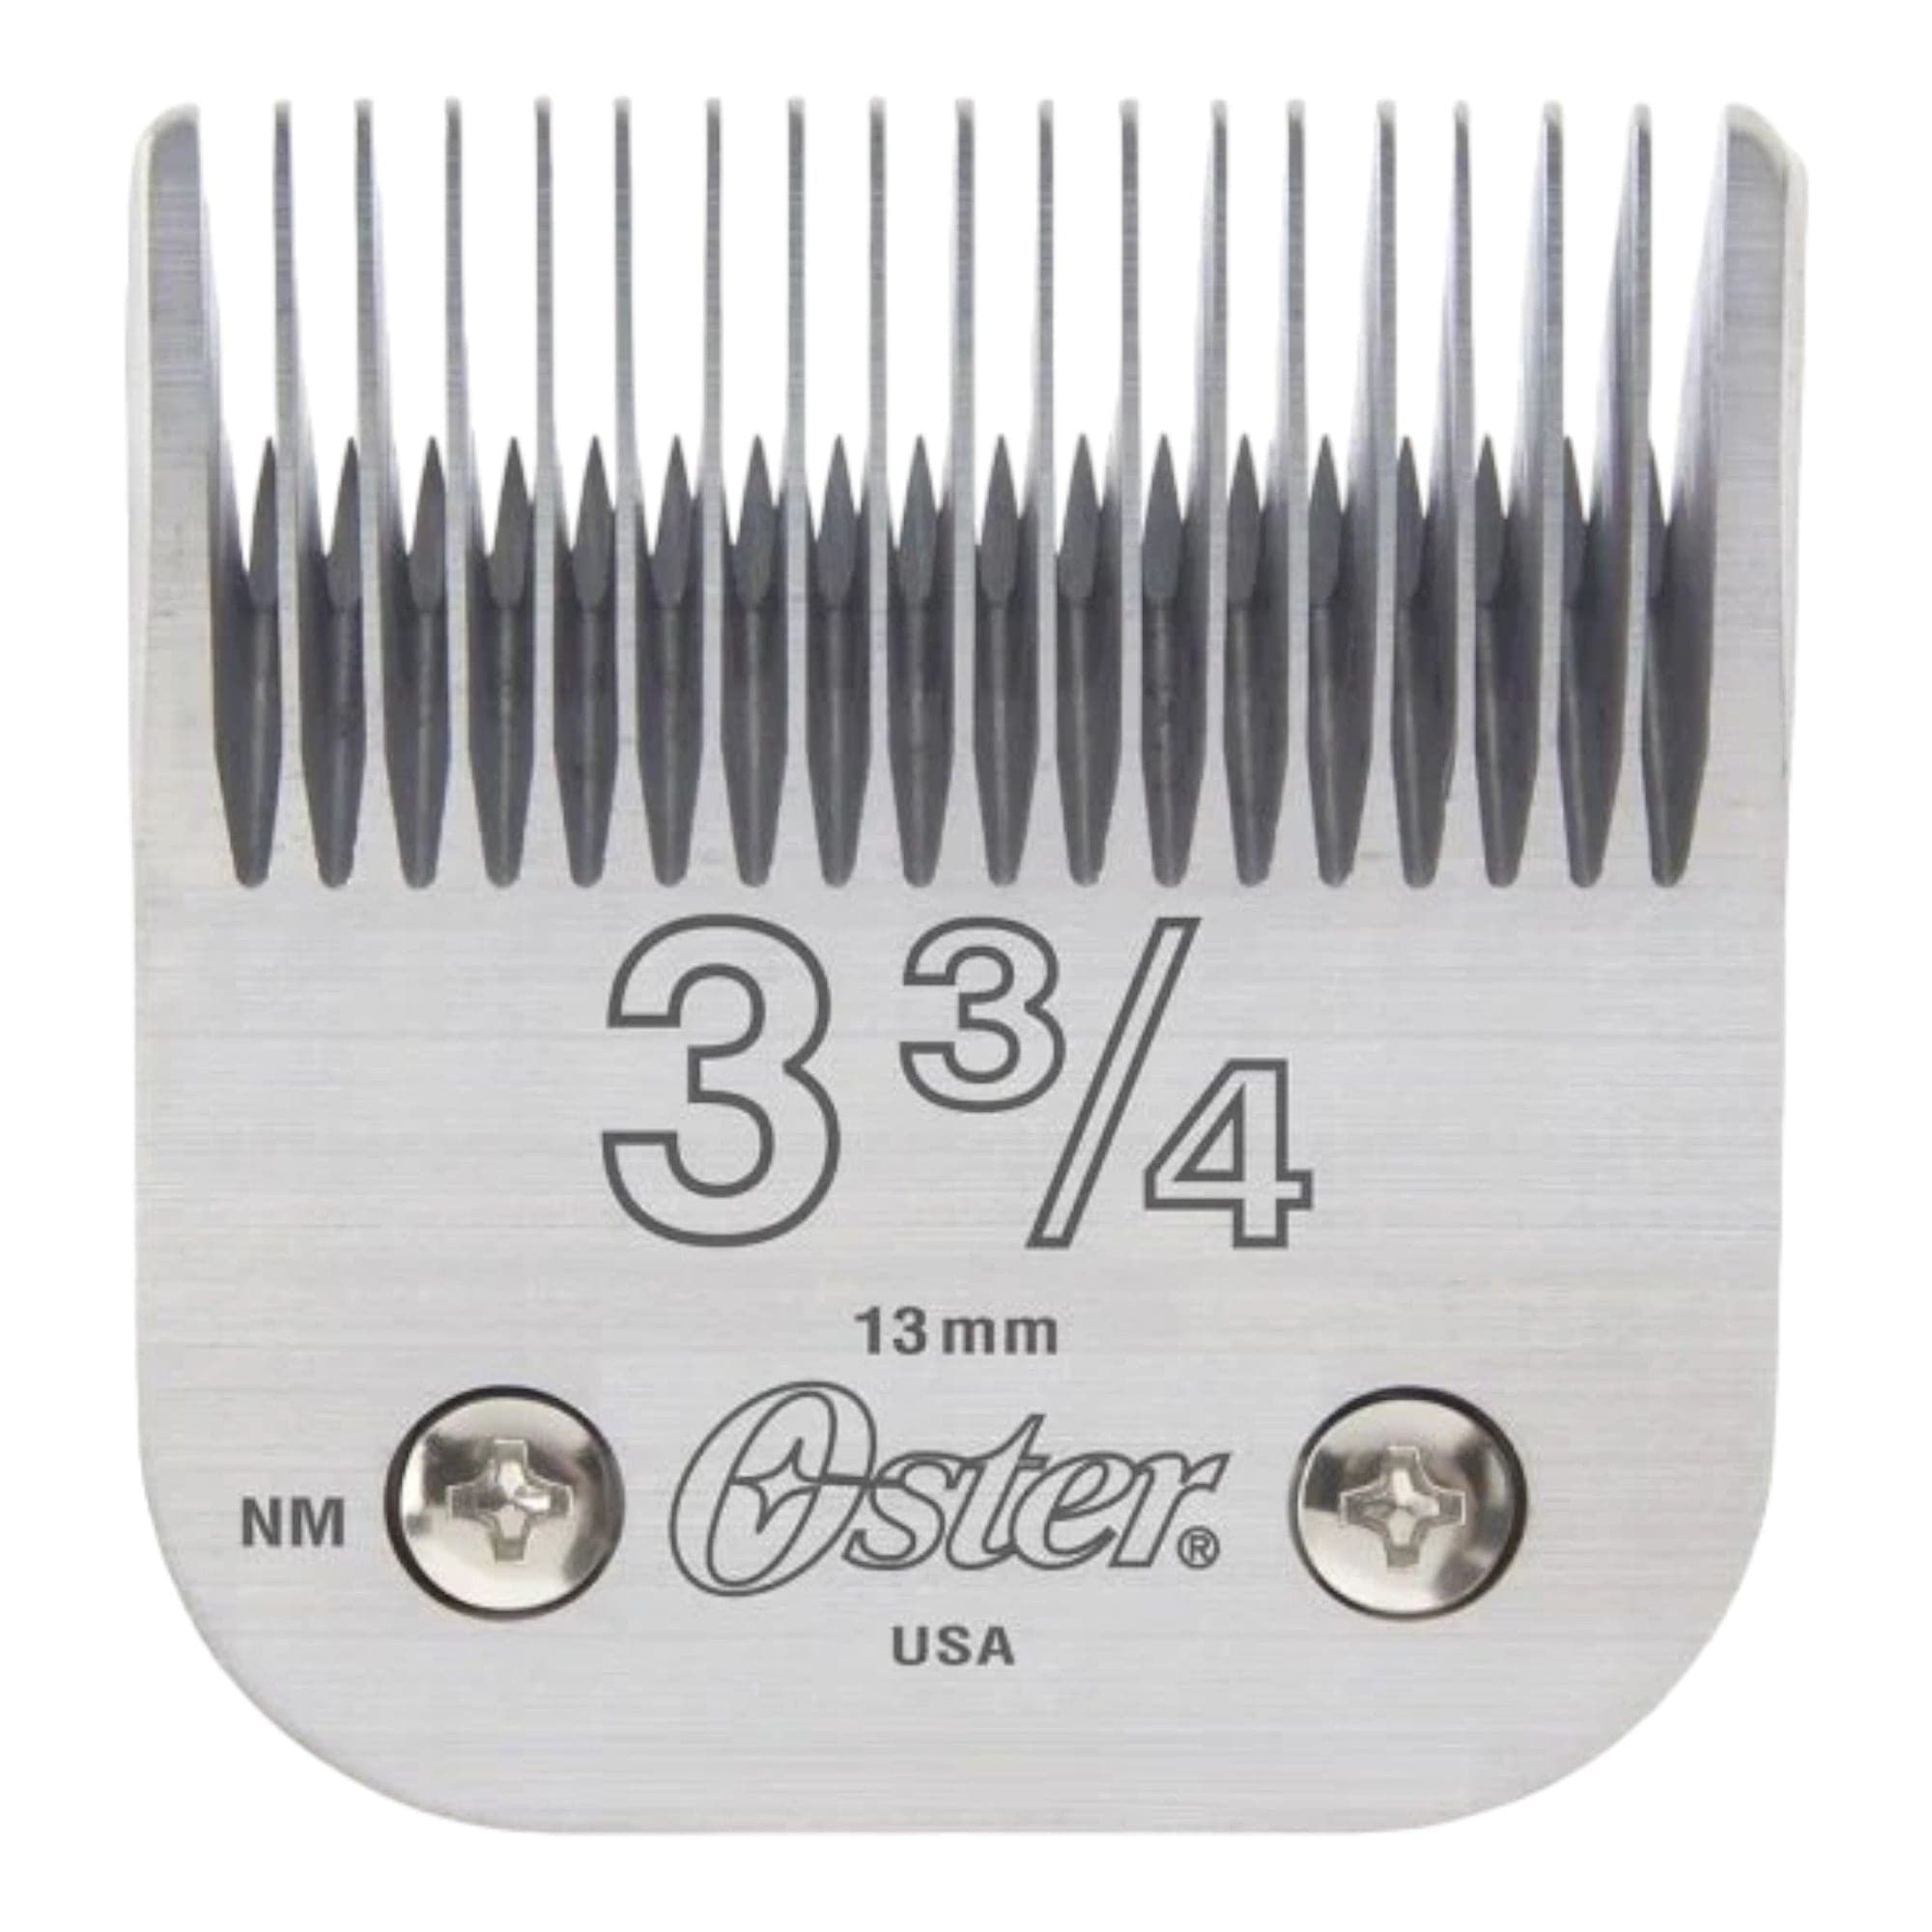 Oster - Detachable Blade Size 3.75 - 13mm 076918-206